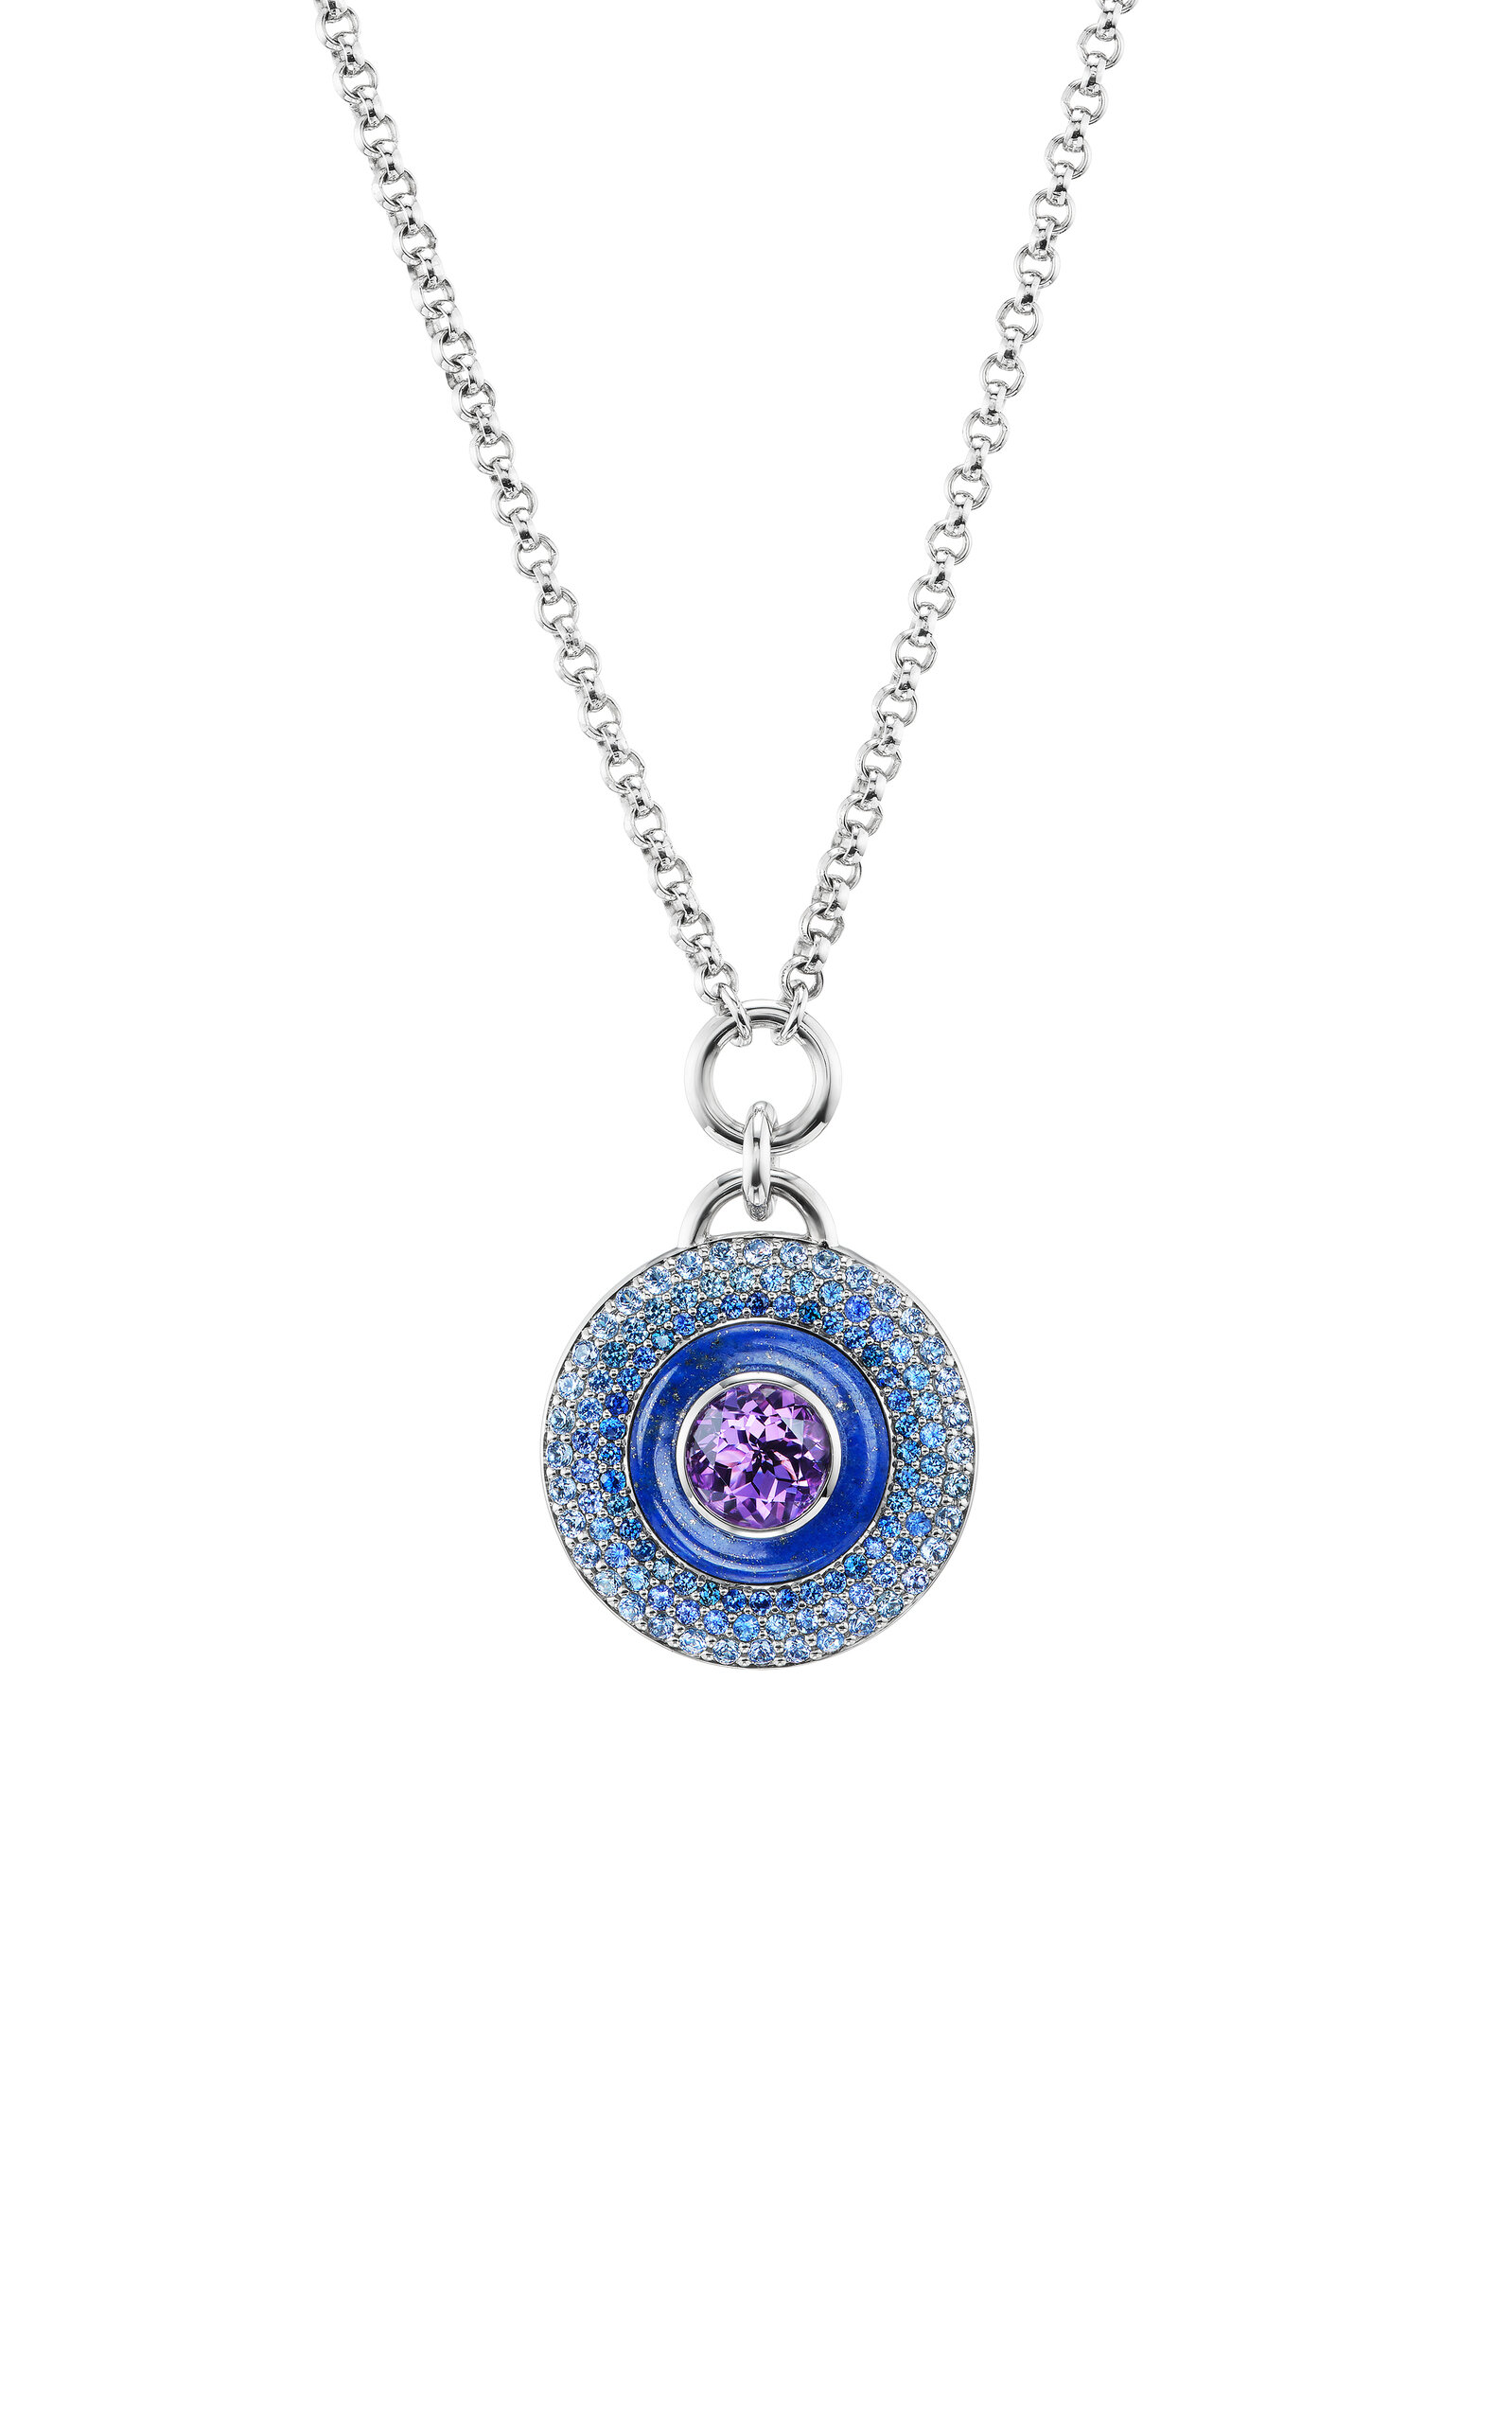 Space Medallion 18K White Gold Necklace